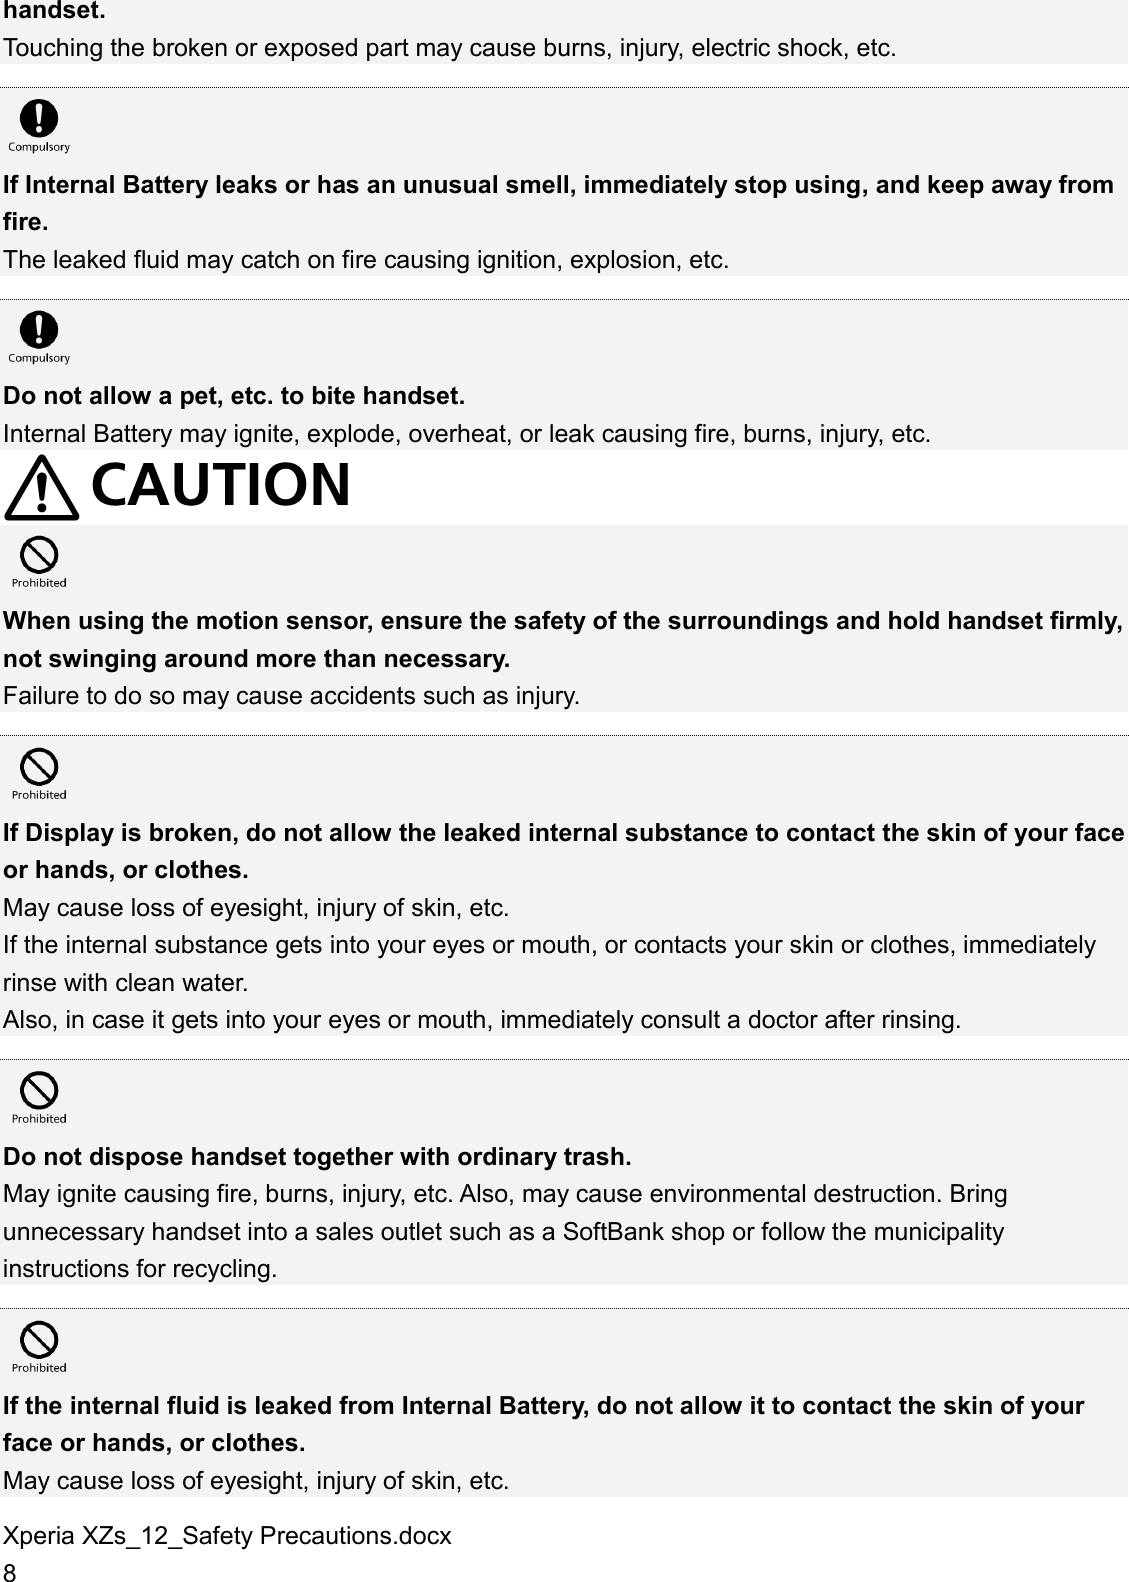 Xperia XZs_12_Safety Precautions.docx 8 handset. Touching the broken or exposed part may cause burns, injury, electric shock, etc.   If Internal Battery leaks or has an unusual smell, immediately stop using, and keep away from fire. The leaked fluid may catch on fire causing ignition, explosion, etc.   Do not allow a pet, etc. to bite handset. Internal Battery may ignite, explode, overheat, or leak causing fire, burns, injury, etc.   When using the motion sensor, ensure the safety of the surroundings and hold handset firmly, not swinging around more than necessary. Failure to do so may cause accidents such as injury.   If Display is broken, do not allow the leaked internal substance to contact the skin of your face or hands, or clothes. May cause loss of eyesight, injury of skin, etc. If the internal substance gets into your eyes or mouth, or contacts your skin or clothes, immediately rinse with clean water. Also, in case it gets into your eyes or mouth, immediately consult a doctor after rinsing.   Do not dispose handset together with ordinary trash. May ignite causing fire, burns, injury, etc. Also, may cause environmental destruction. Bring unnecessary handset into a sales outlet such as a SoftBank shop or follow the municipality instructions for recycling.   If the internal fluid is leaked from Internal Battery, do not allow it to contact the skin of your face or hands, or clothes. May cause loss of eyesight, injury of skin, etc. 